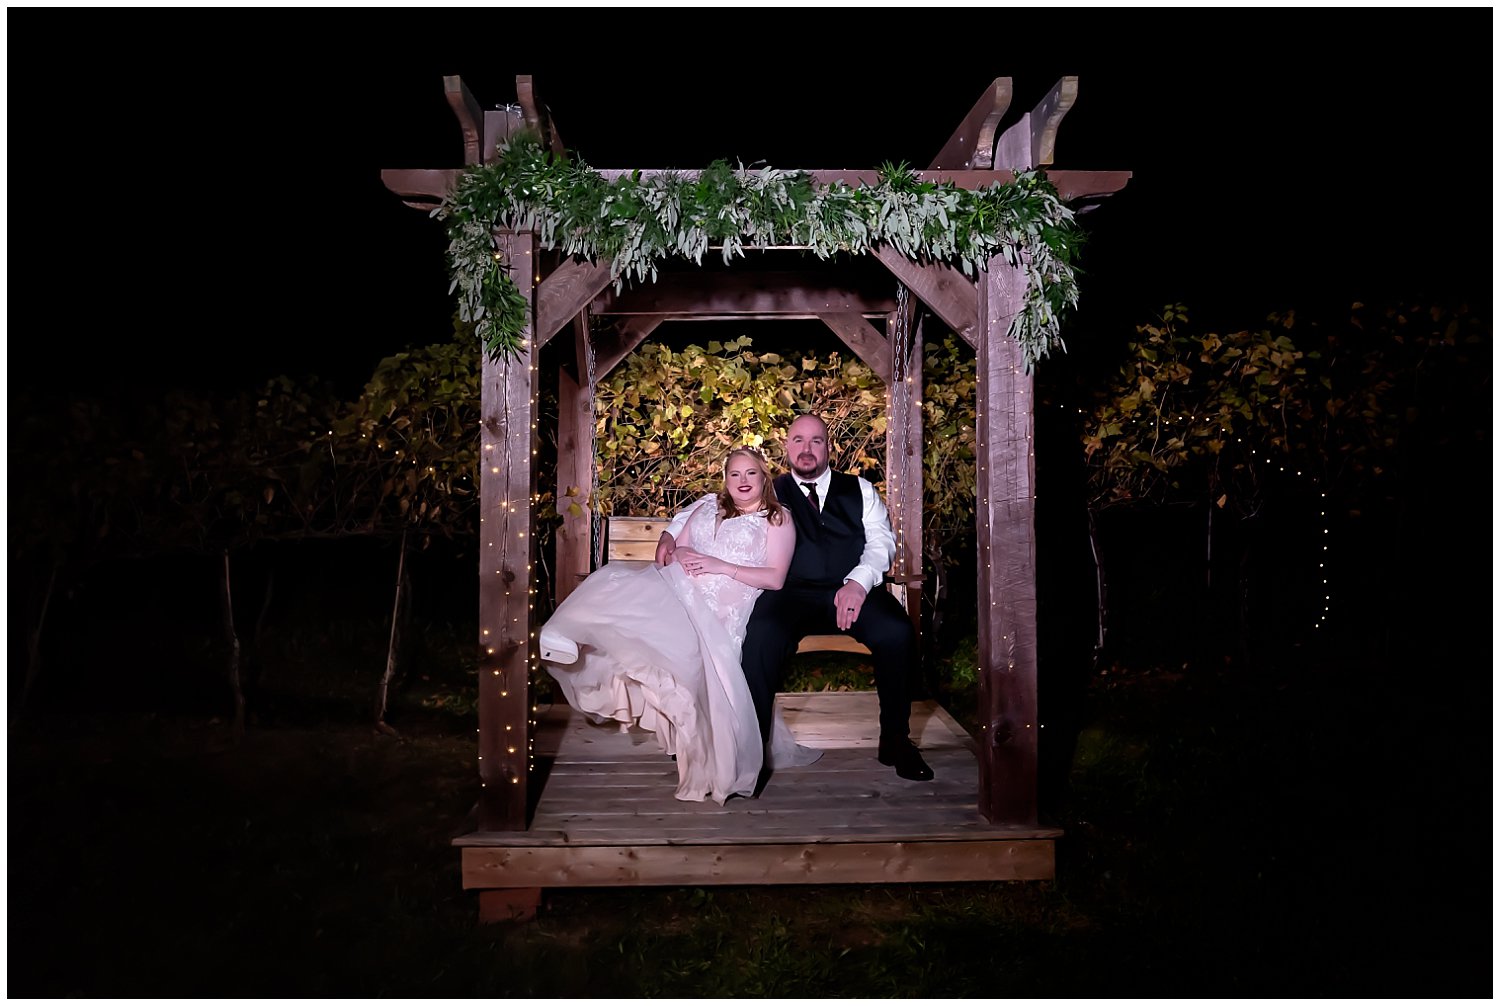 The bride and groom pose on a swing at night infront of mini lights at the Bent Ridge Winery in NS.